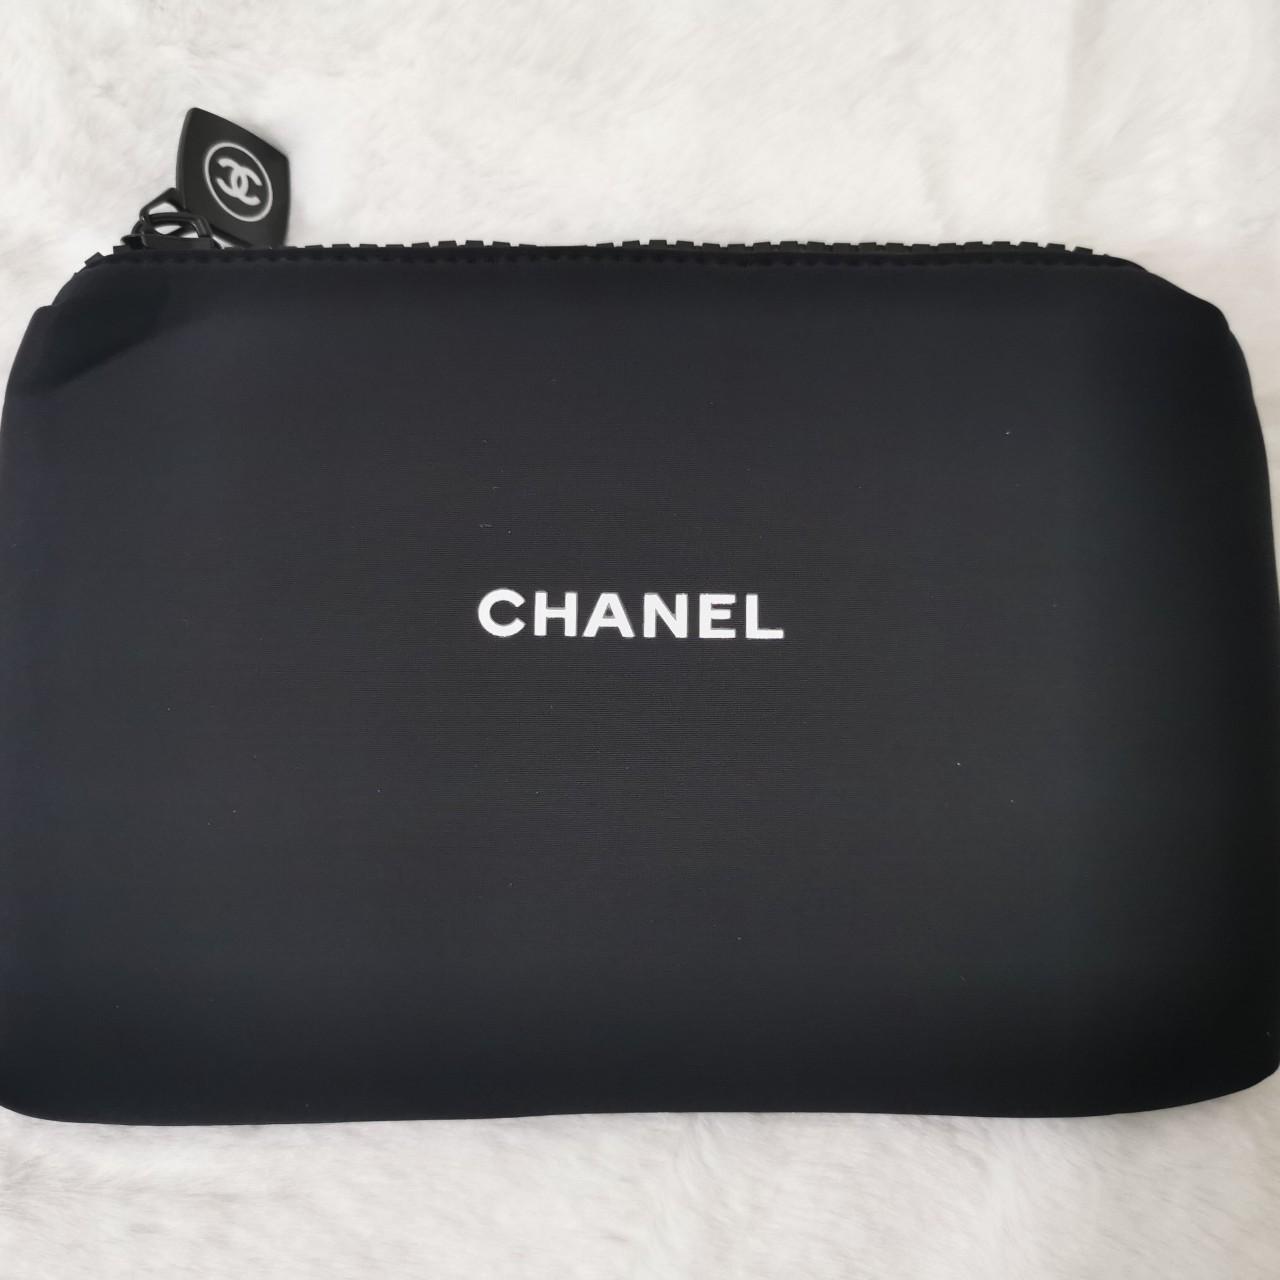 Chanel Rolling Tray!! Light pink and silver sparkles - Depop